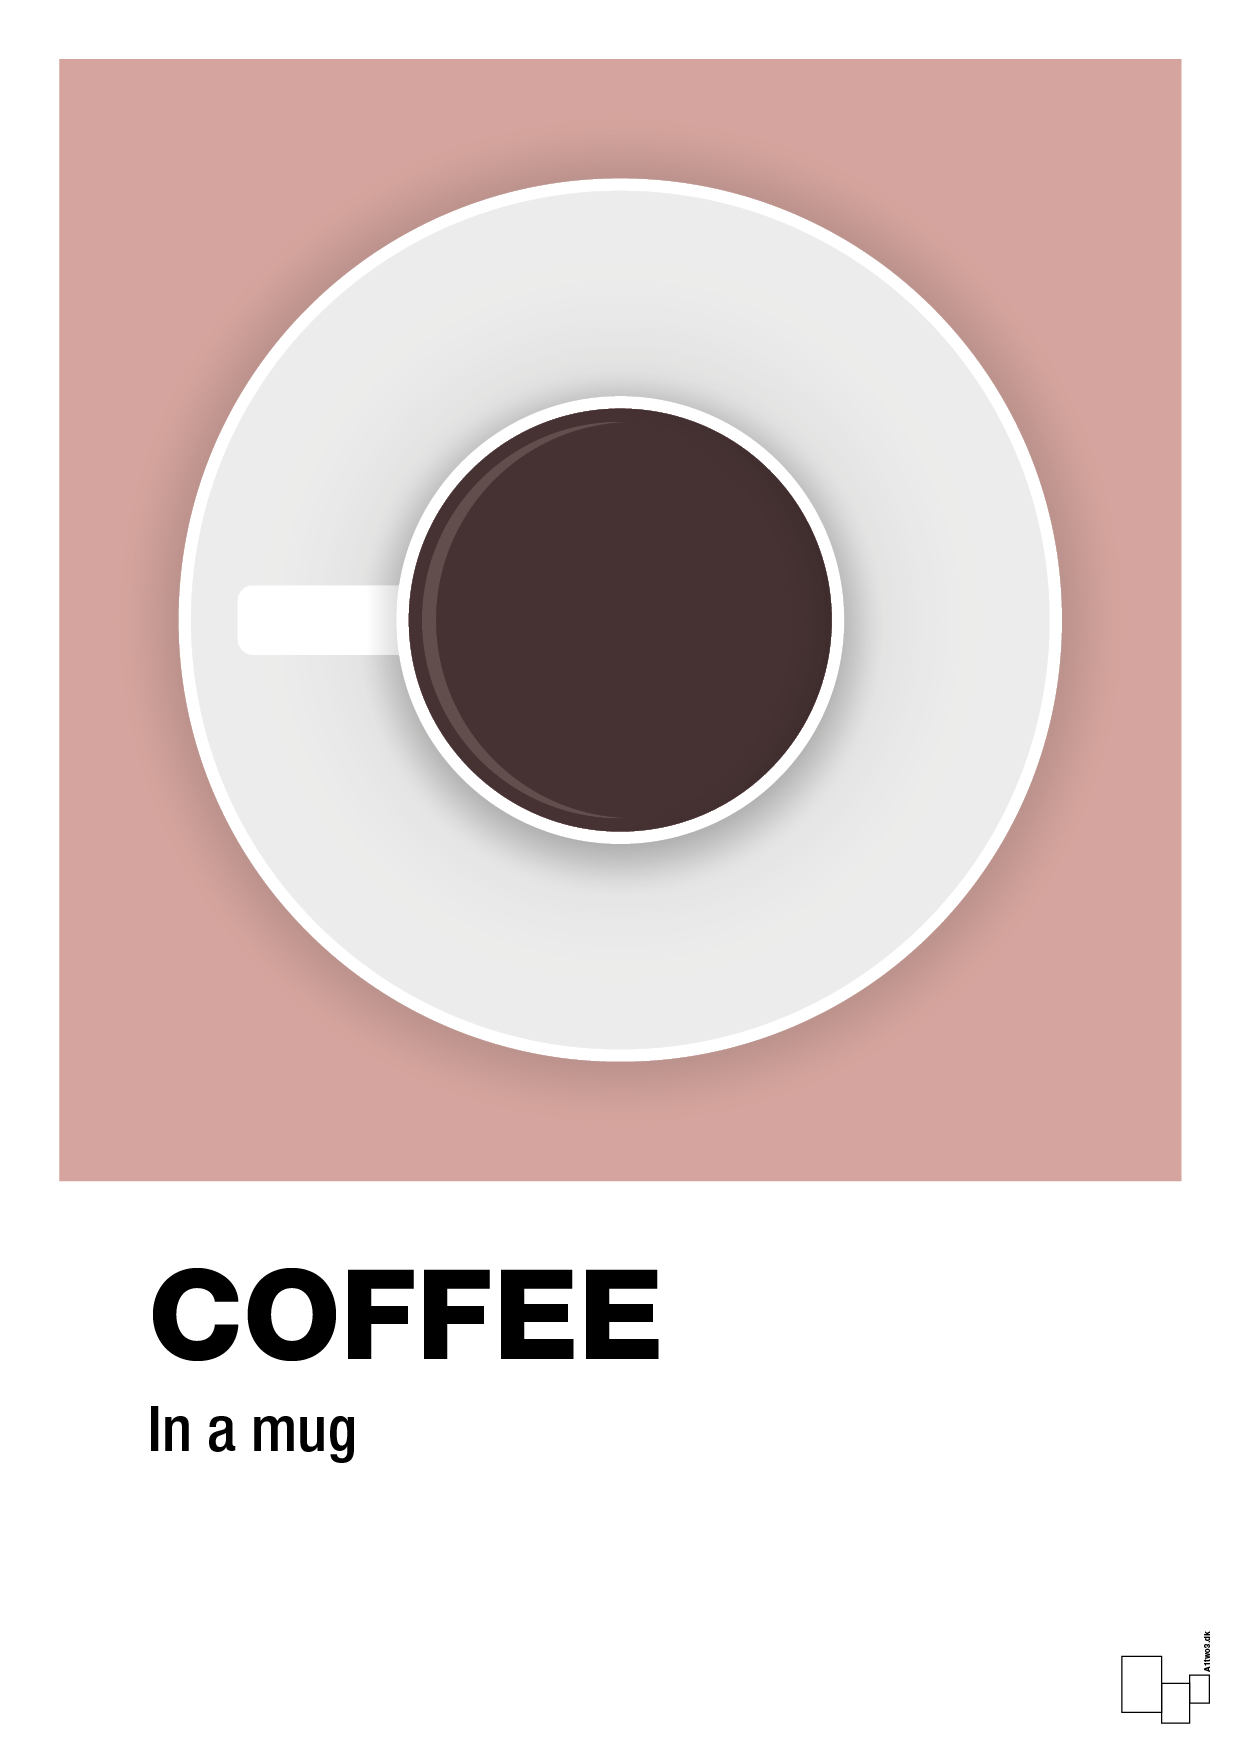 coffee in a mug - Plakat med Mad & Drikke i Bubble Shell